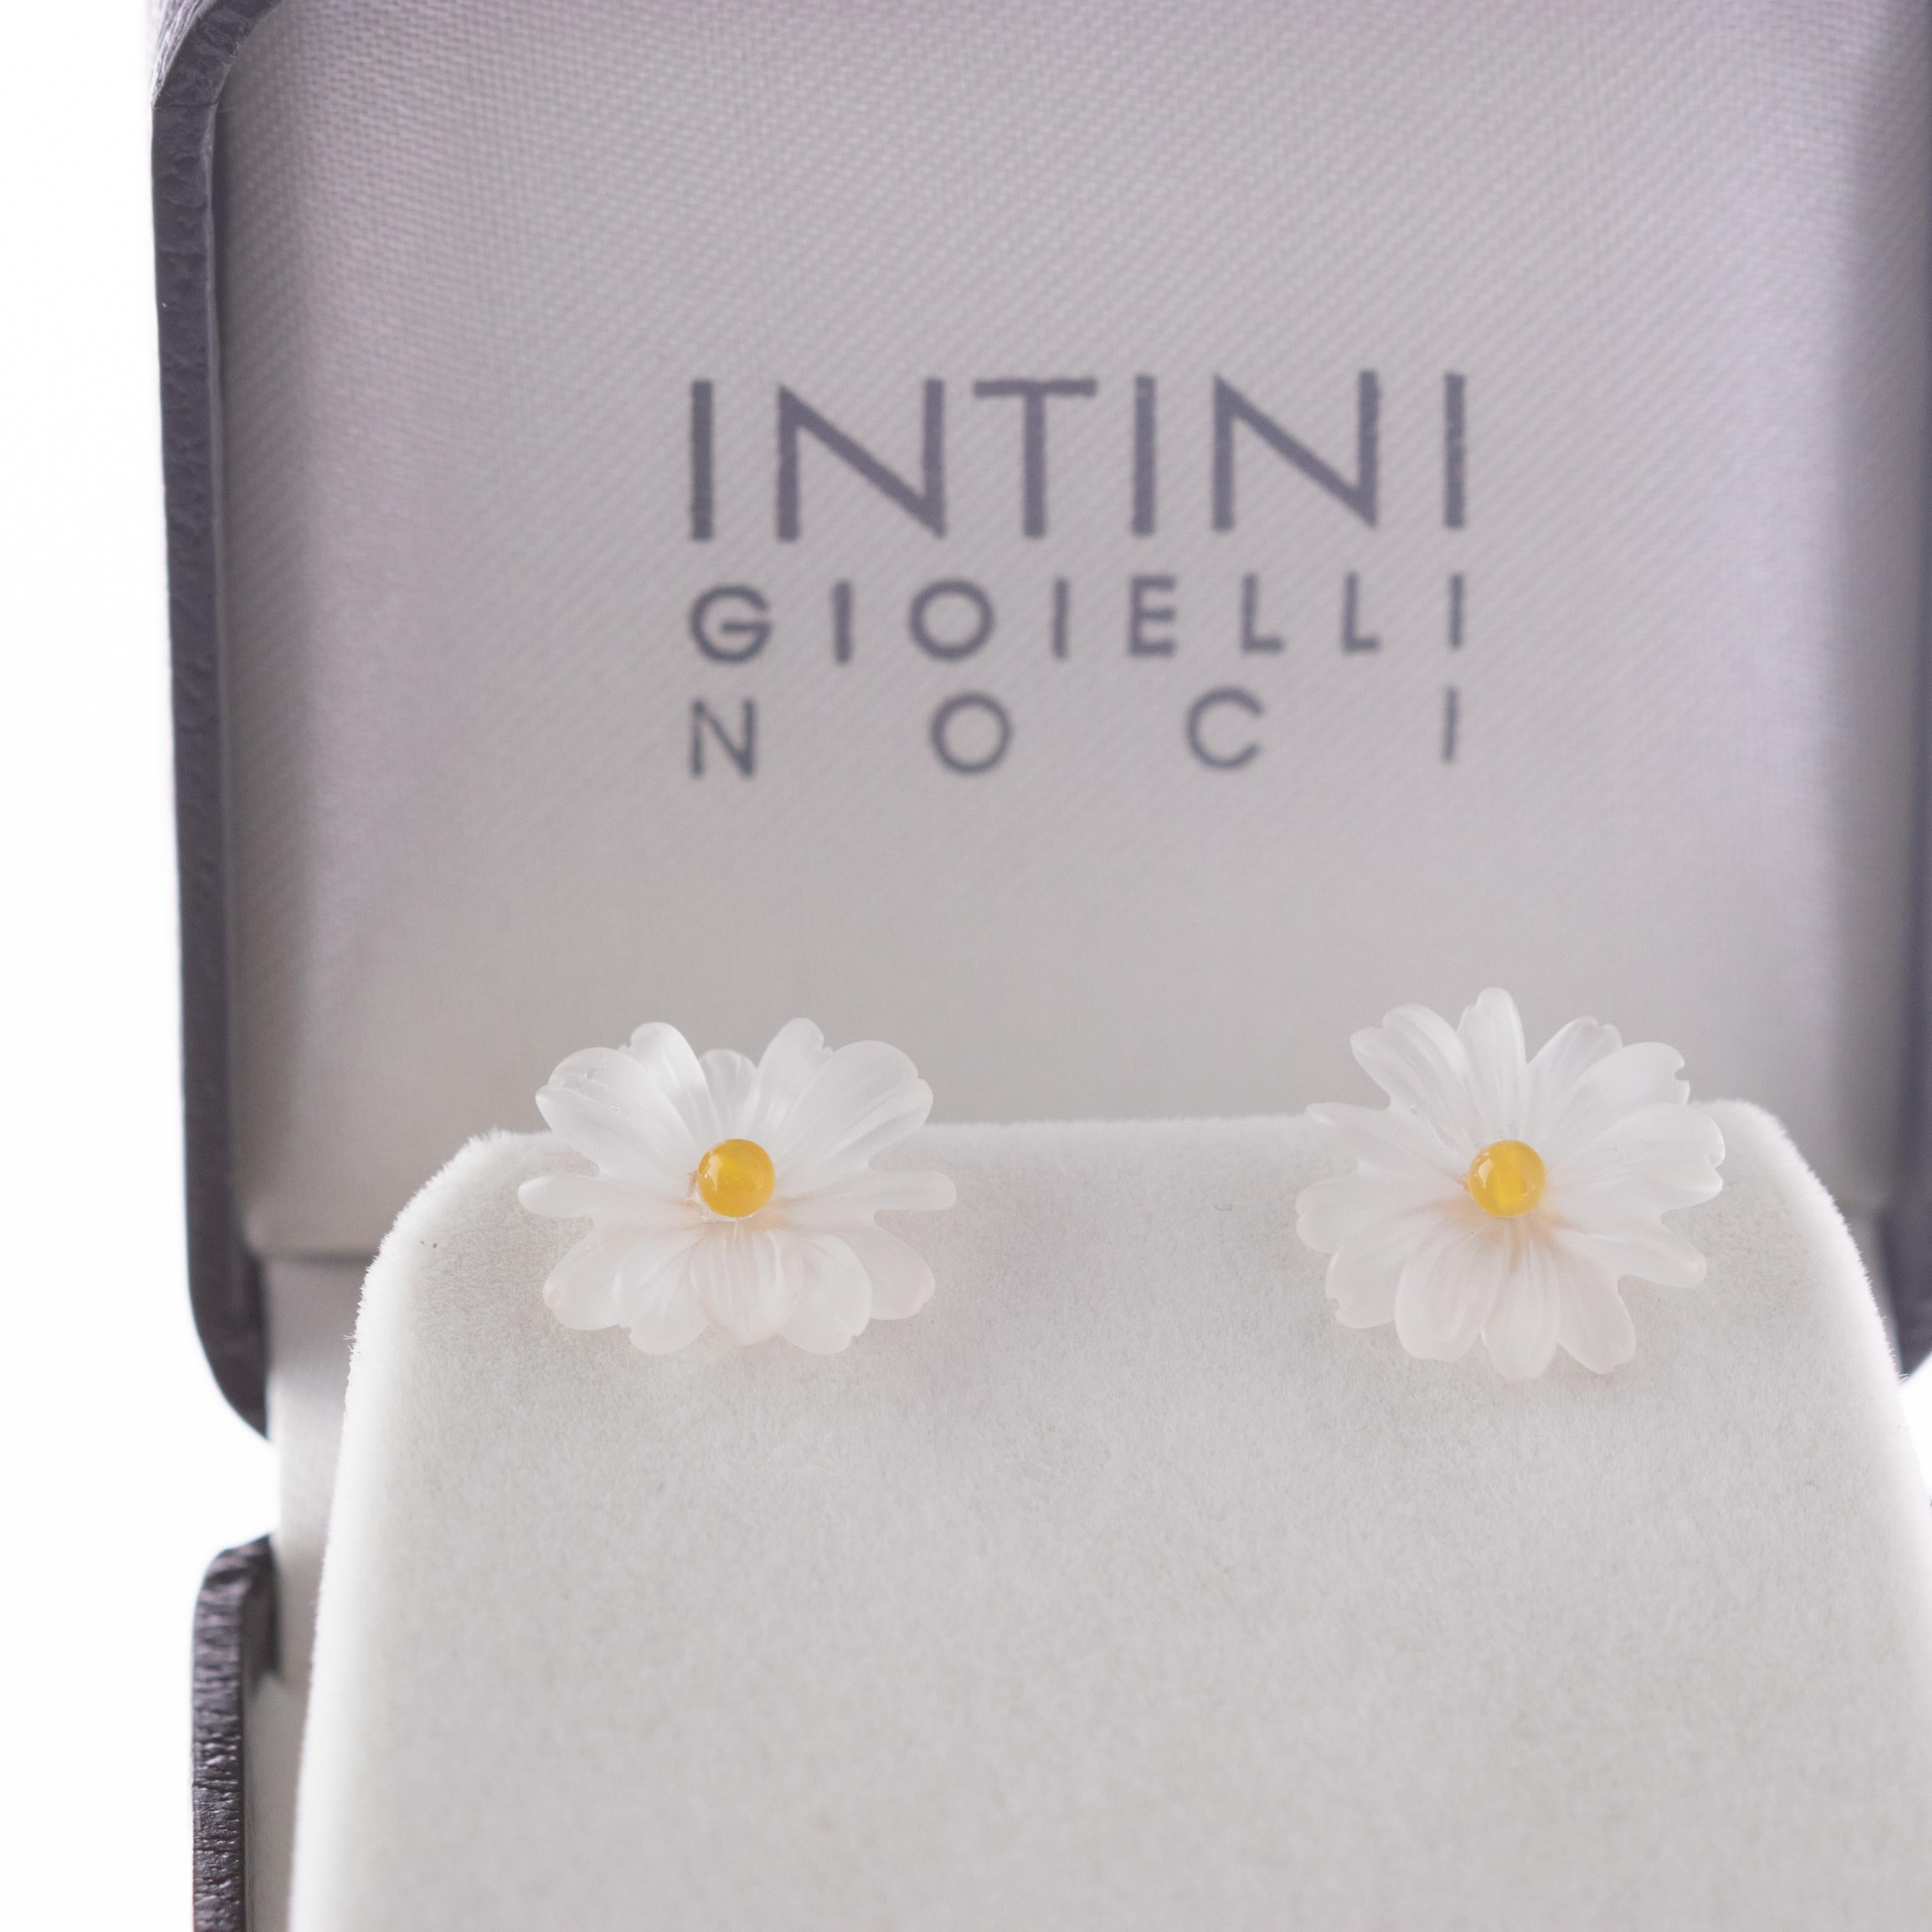 Astonishing and delicate 5.5 ct rock crystal flower. Stud earrings with a small yellow agate bead in the middle. Carved petals that evoke the italian handmade traditional jewelry work, wrapping itself in a soft look enriched with Gold Plate